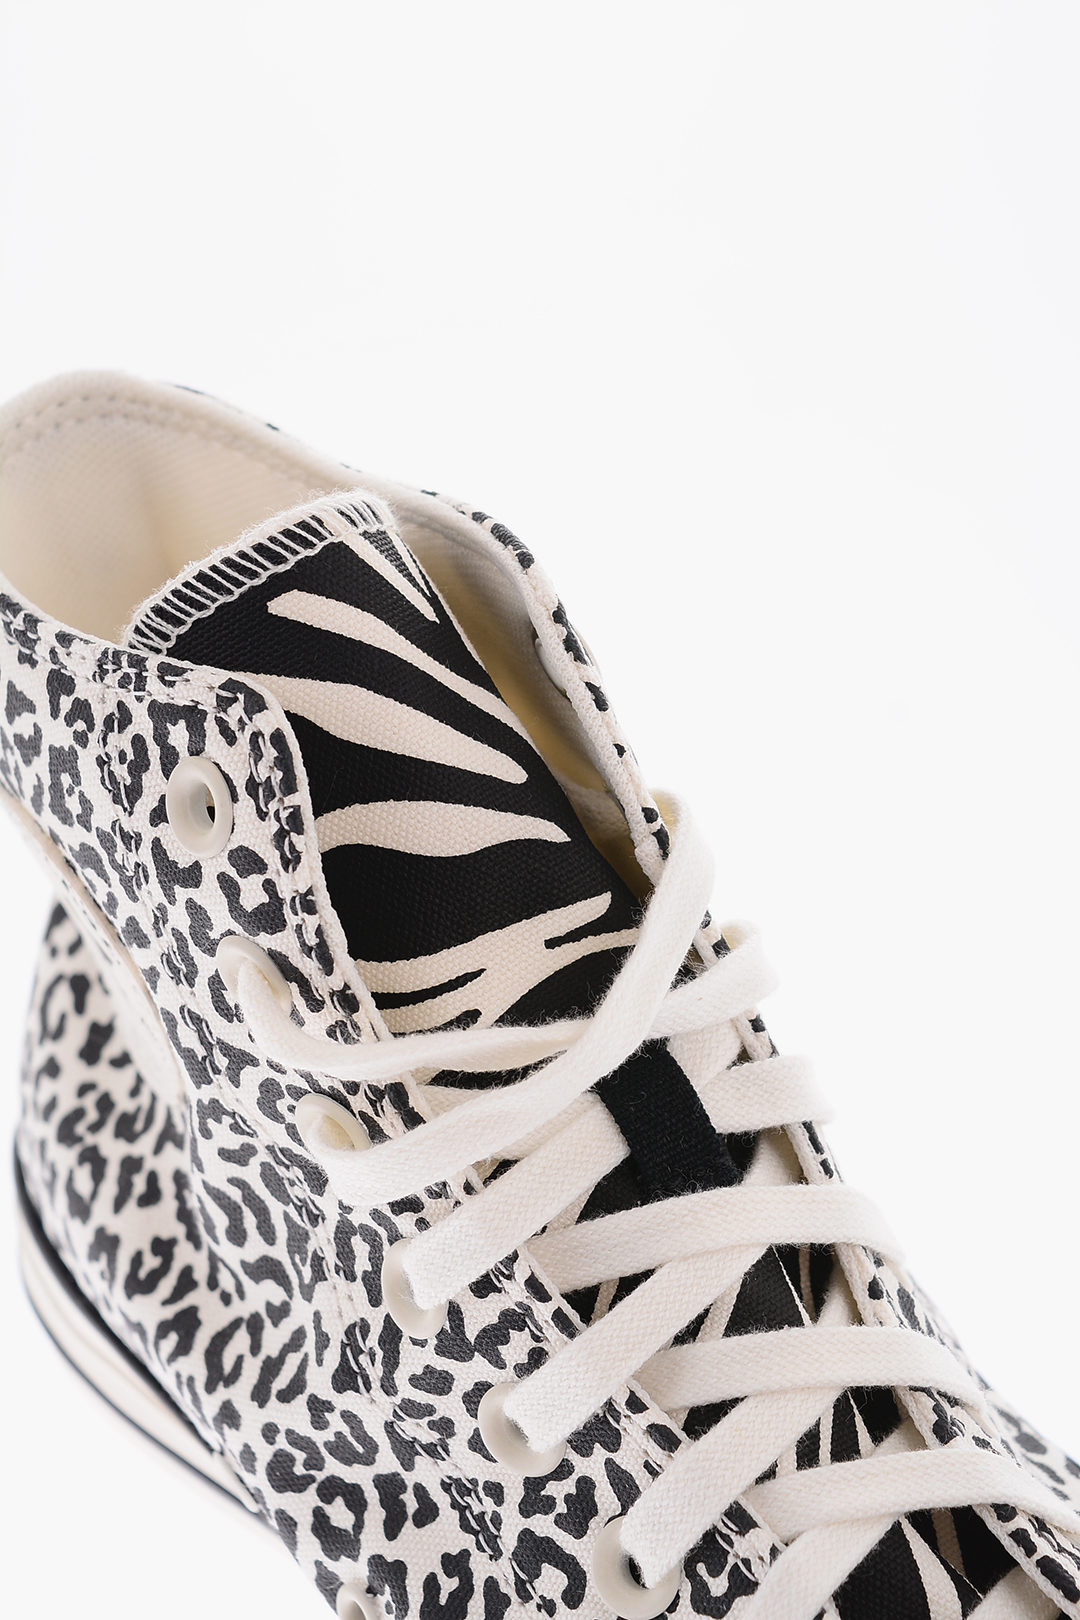 chuck taylor all star cotton animal printed high top sneakers 1253986 zoom